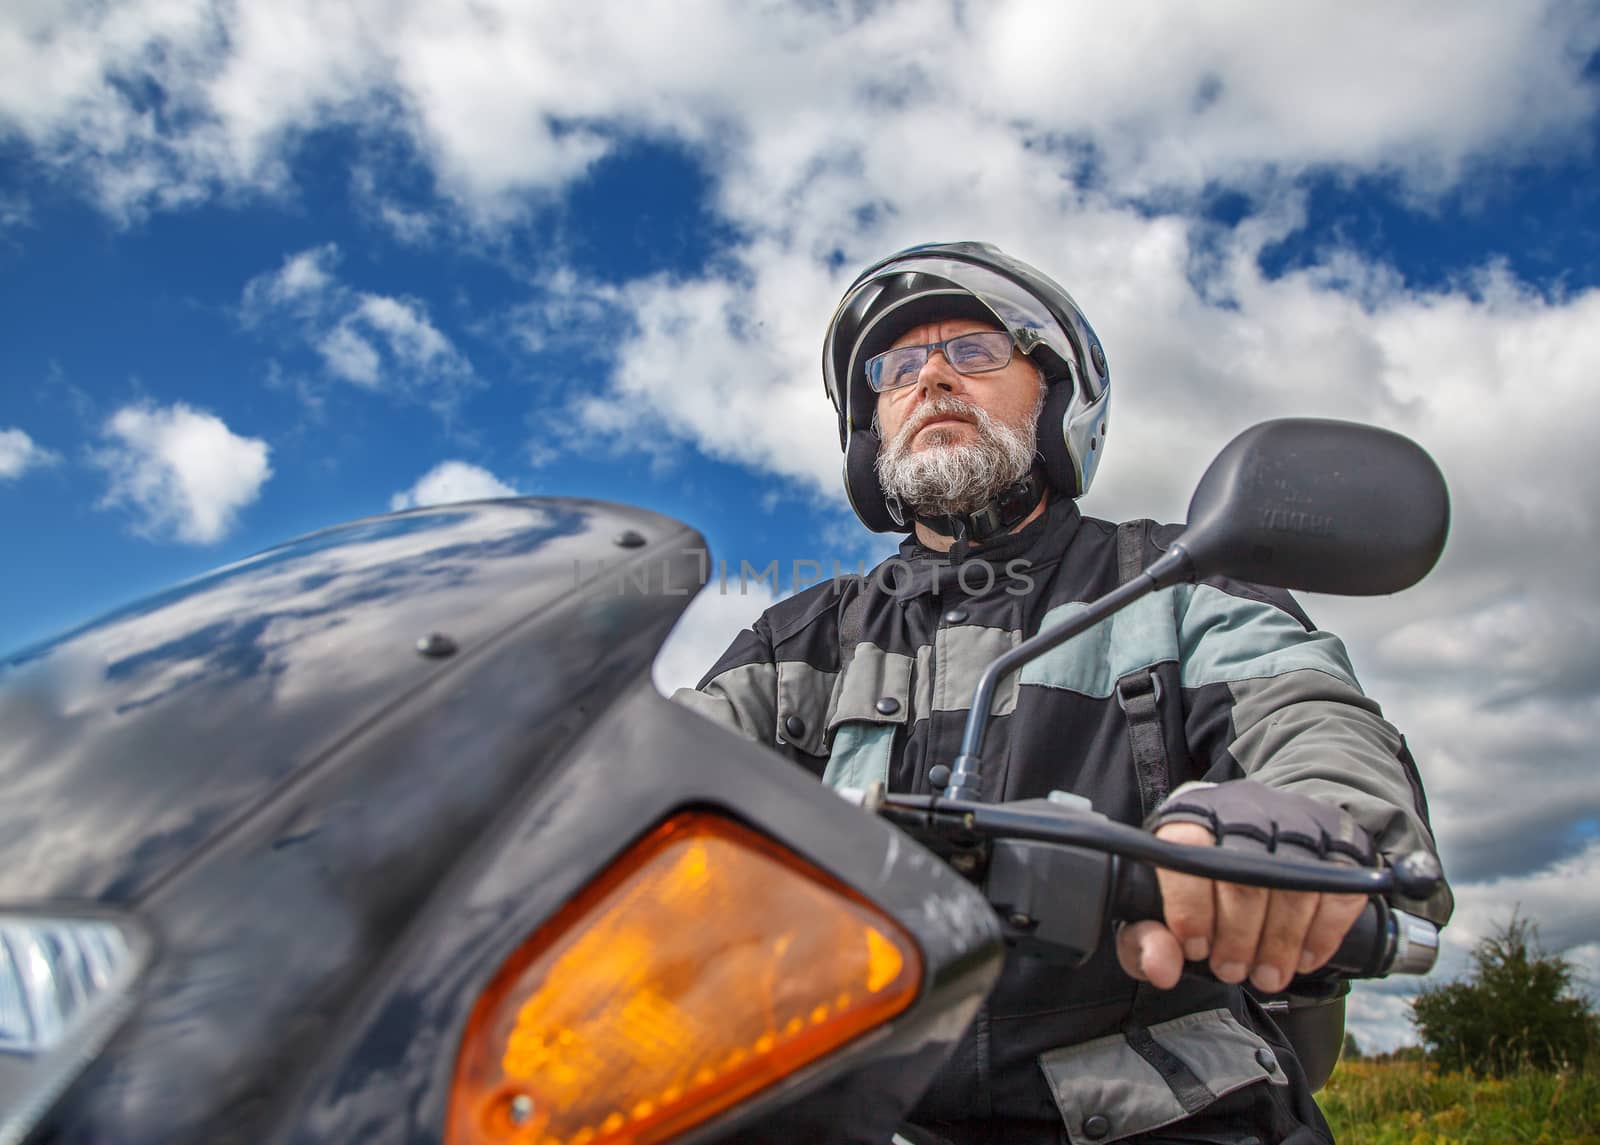 elderly motorcyclist wearing a jacket and glasses with a helmet by raddnatt